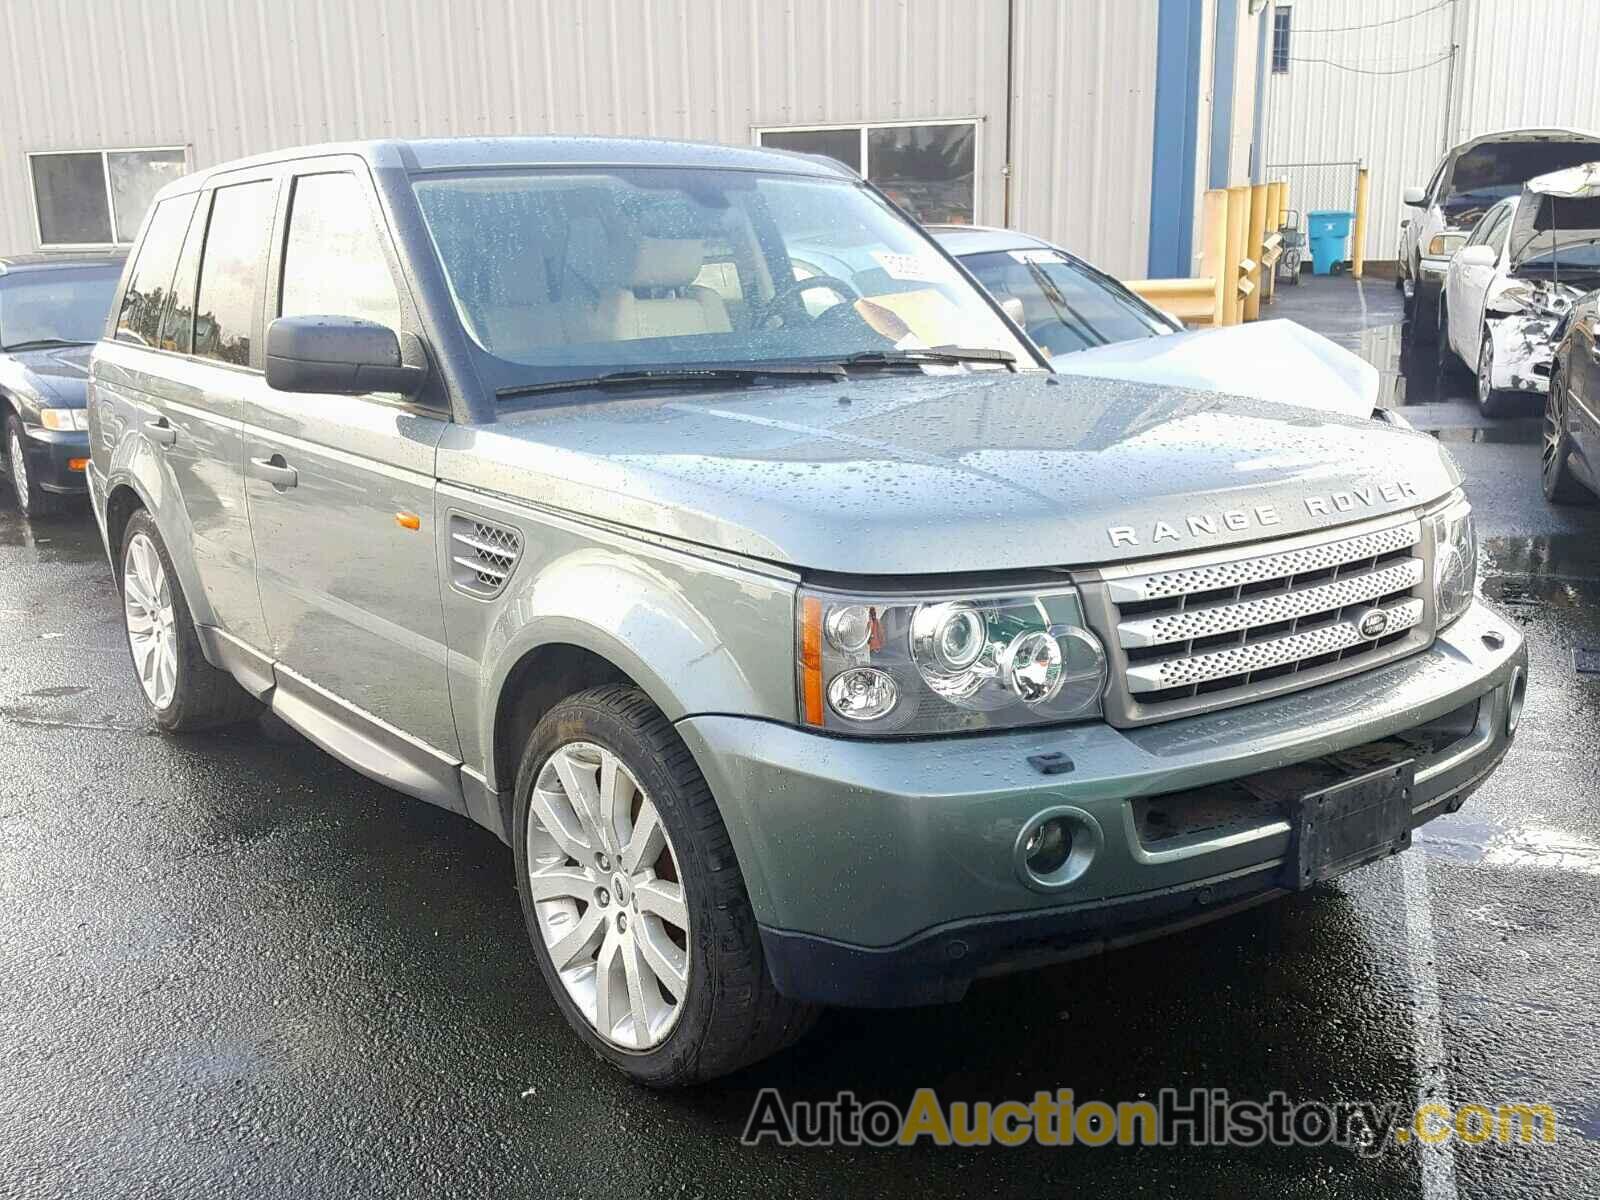 2006 LAND ROVER RANGE ROVER SPORT SUPERCHARGED, SALSH23476A949570